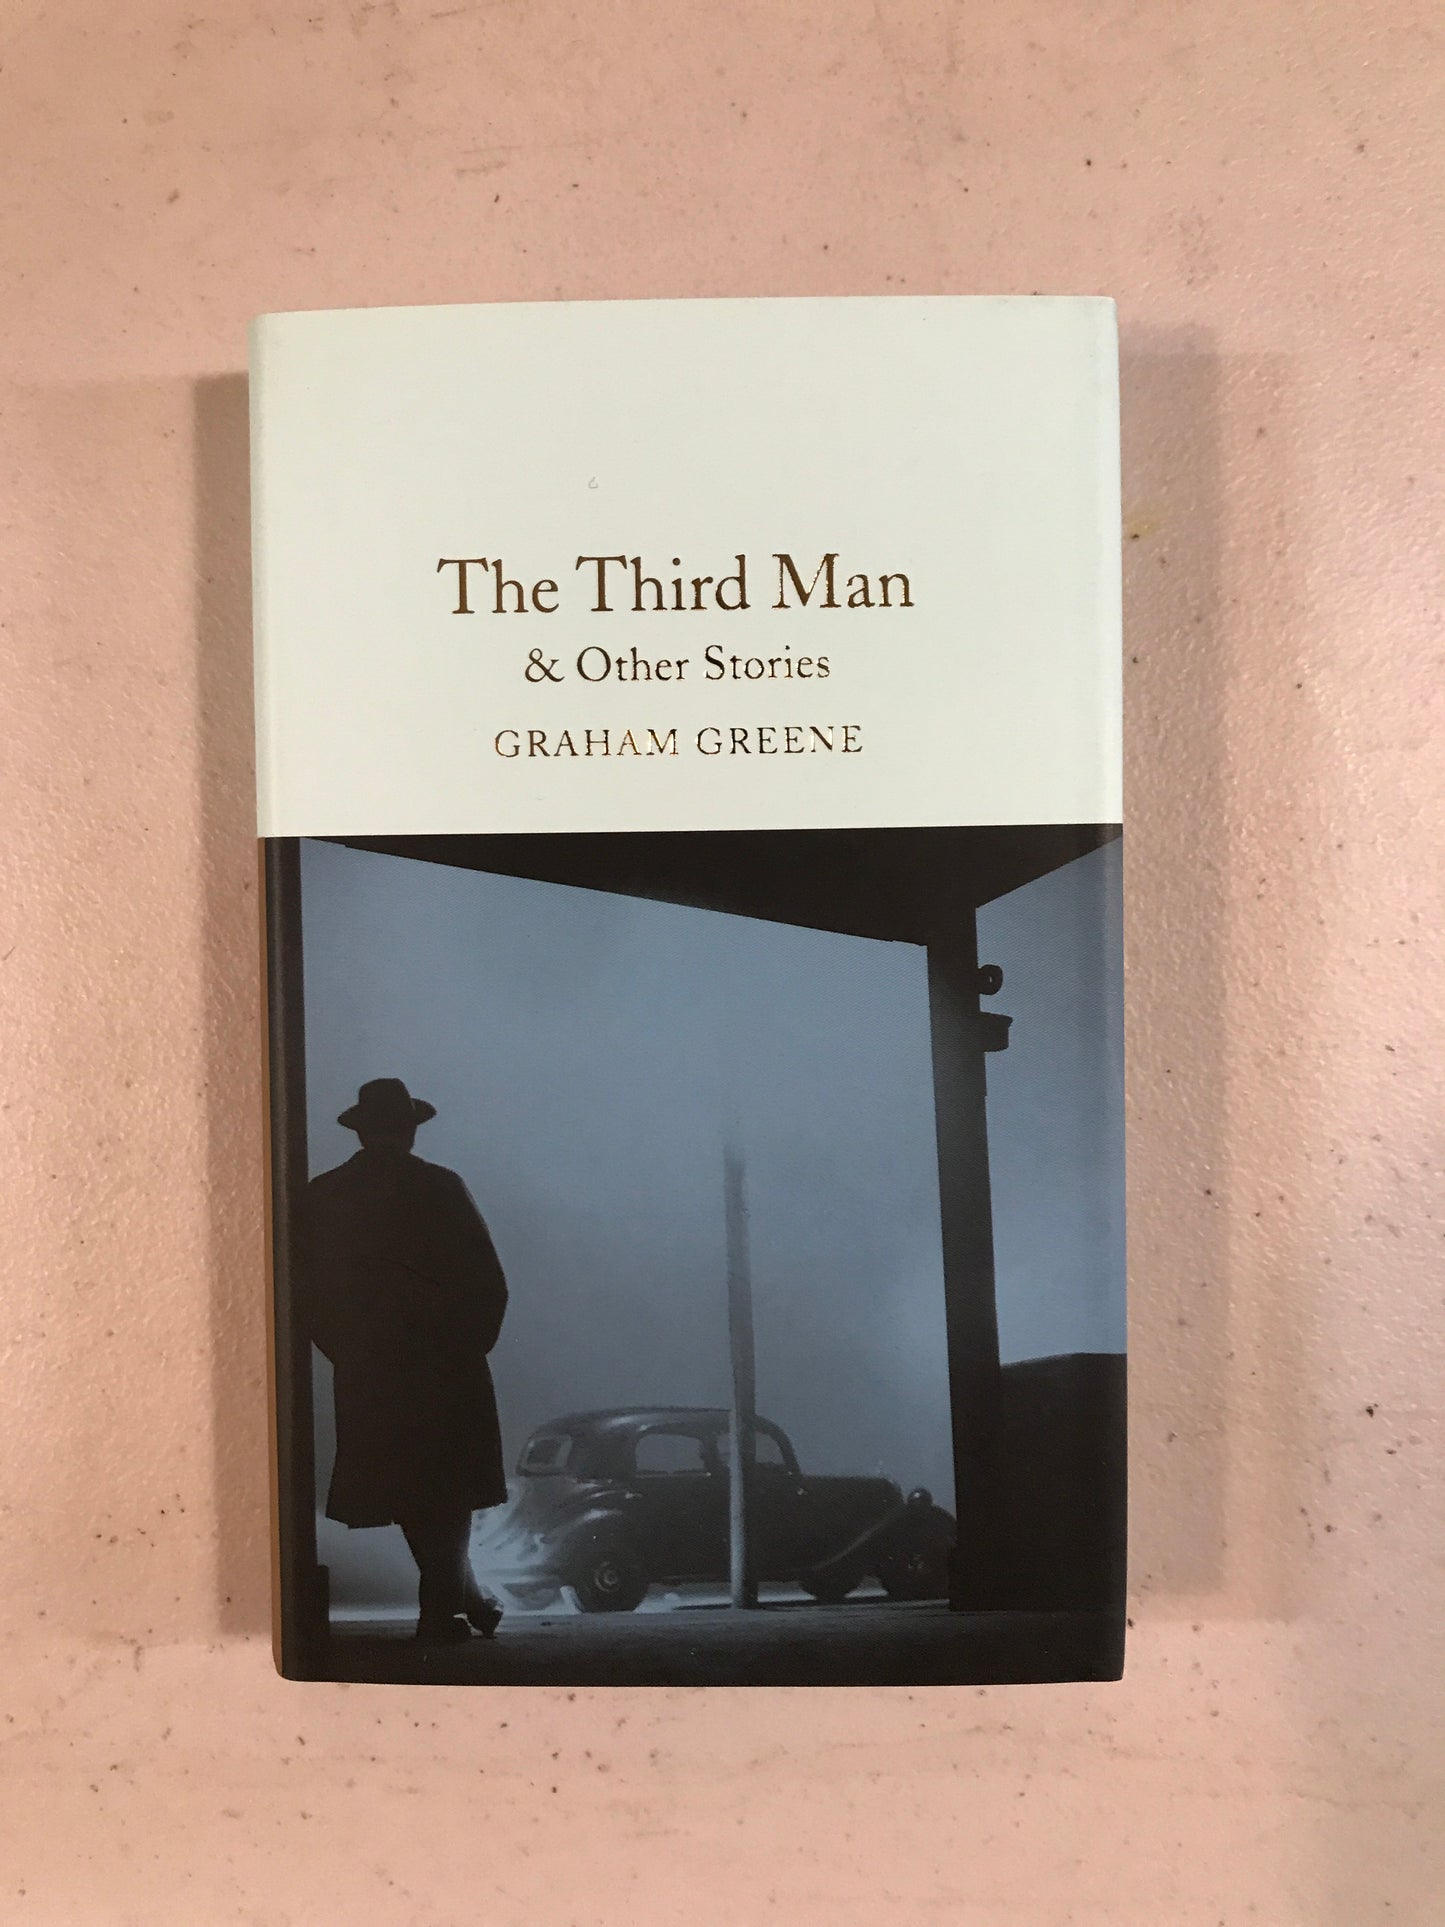 The Third Man & Other Stories